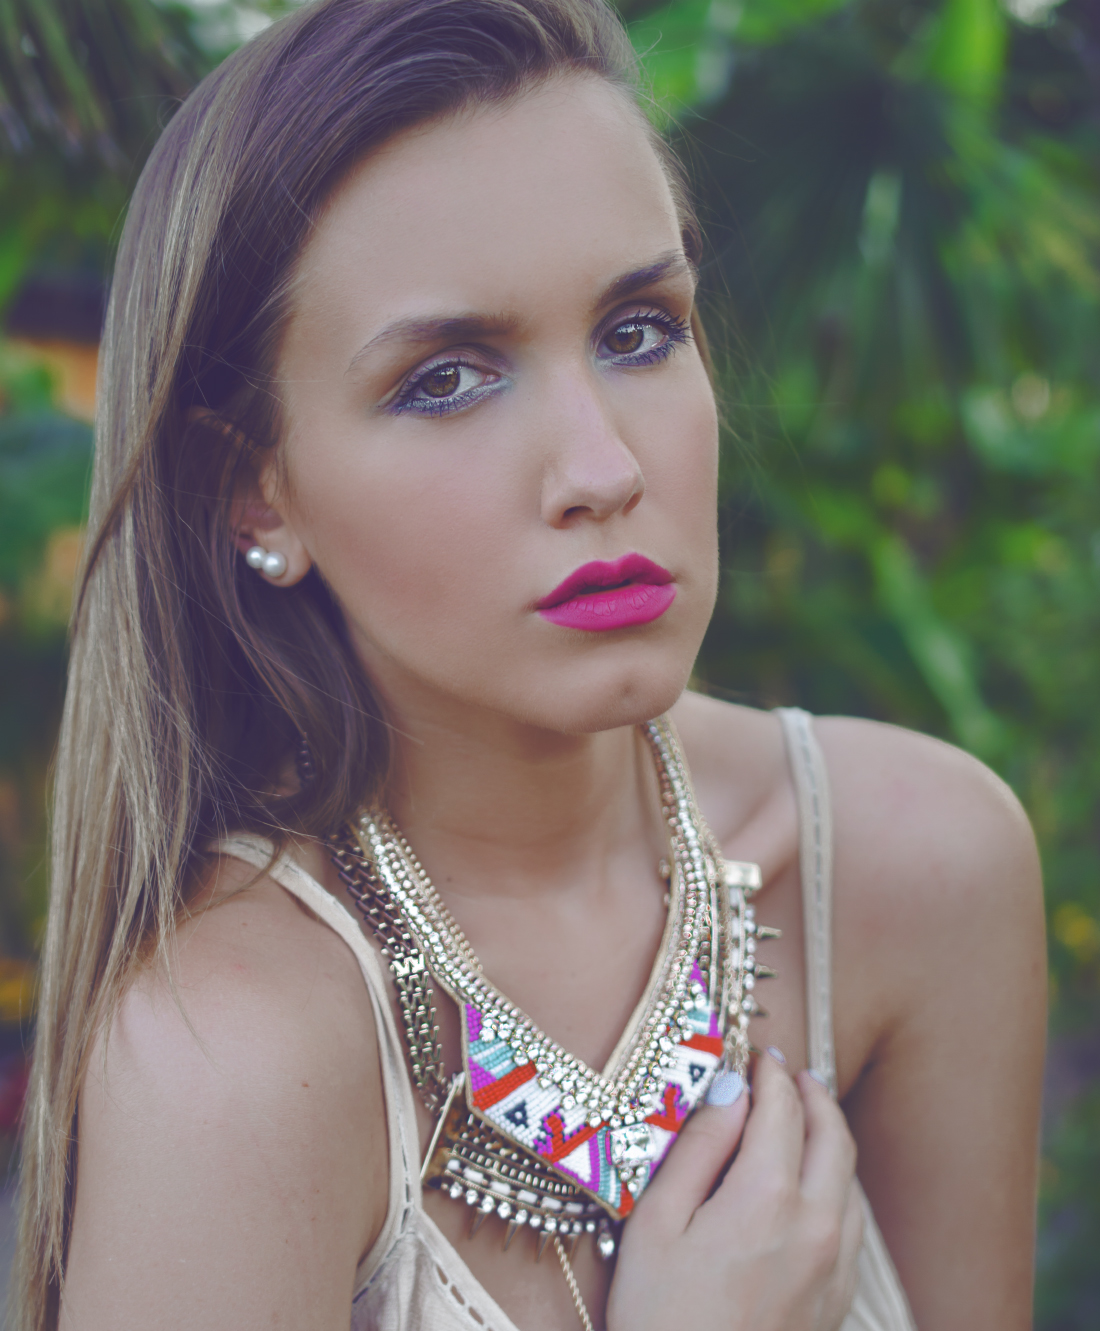 colorful make up and layered statement necklaces